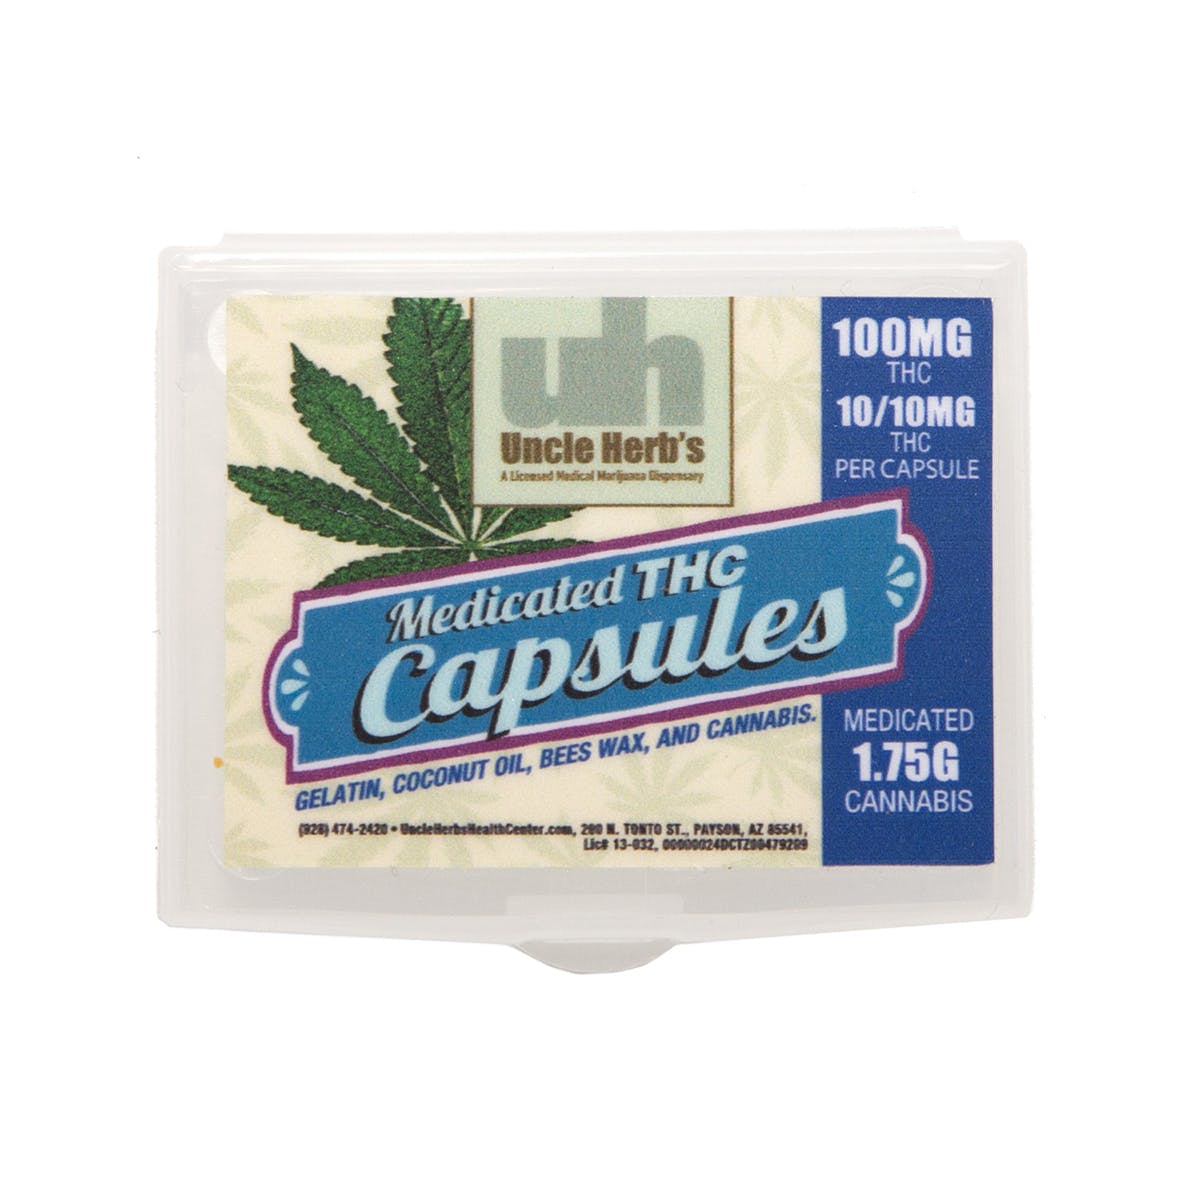 Medicated THC Capsules 100mg